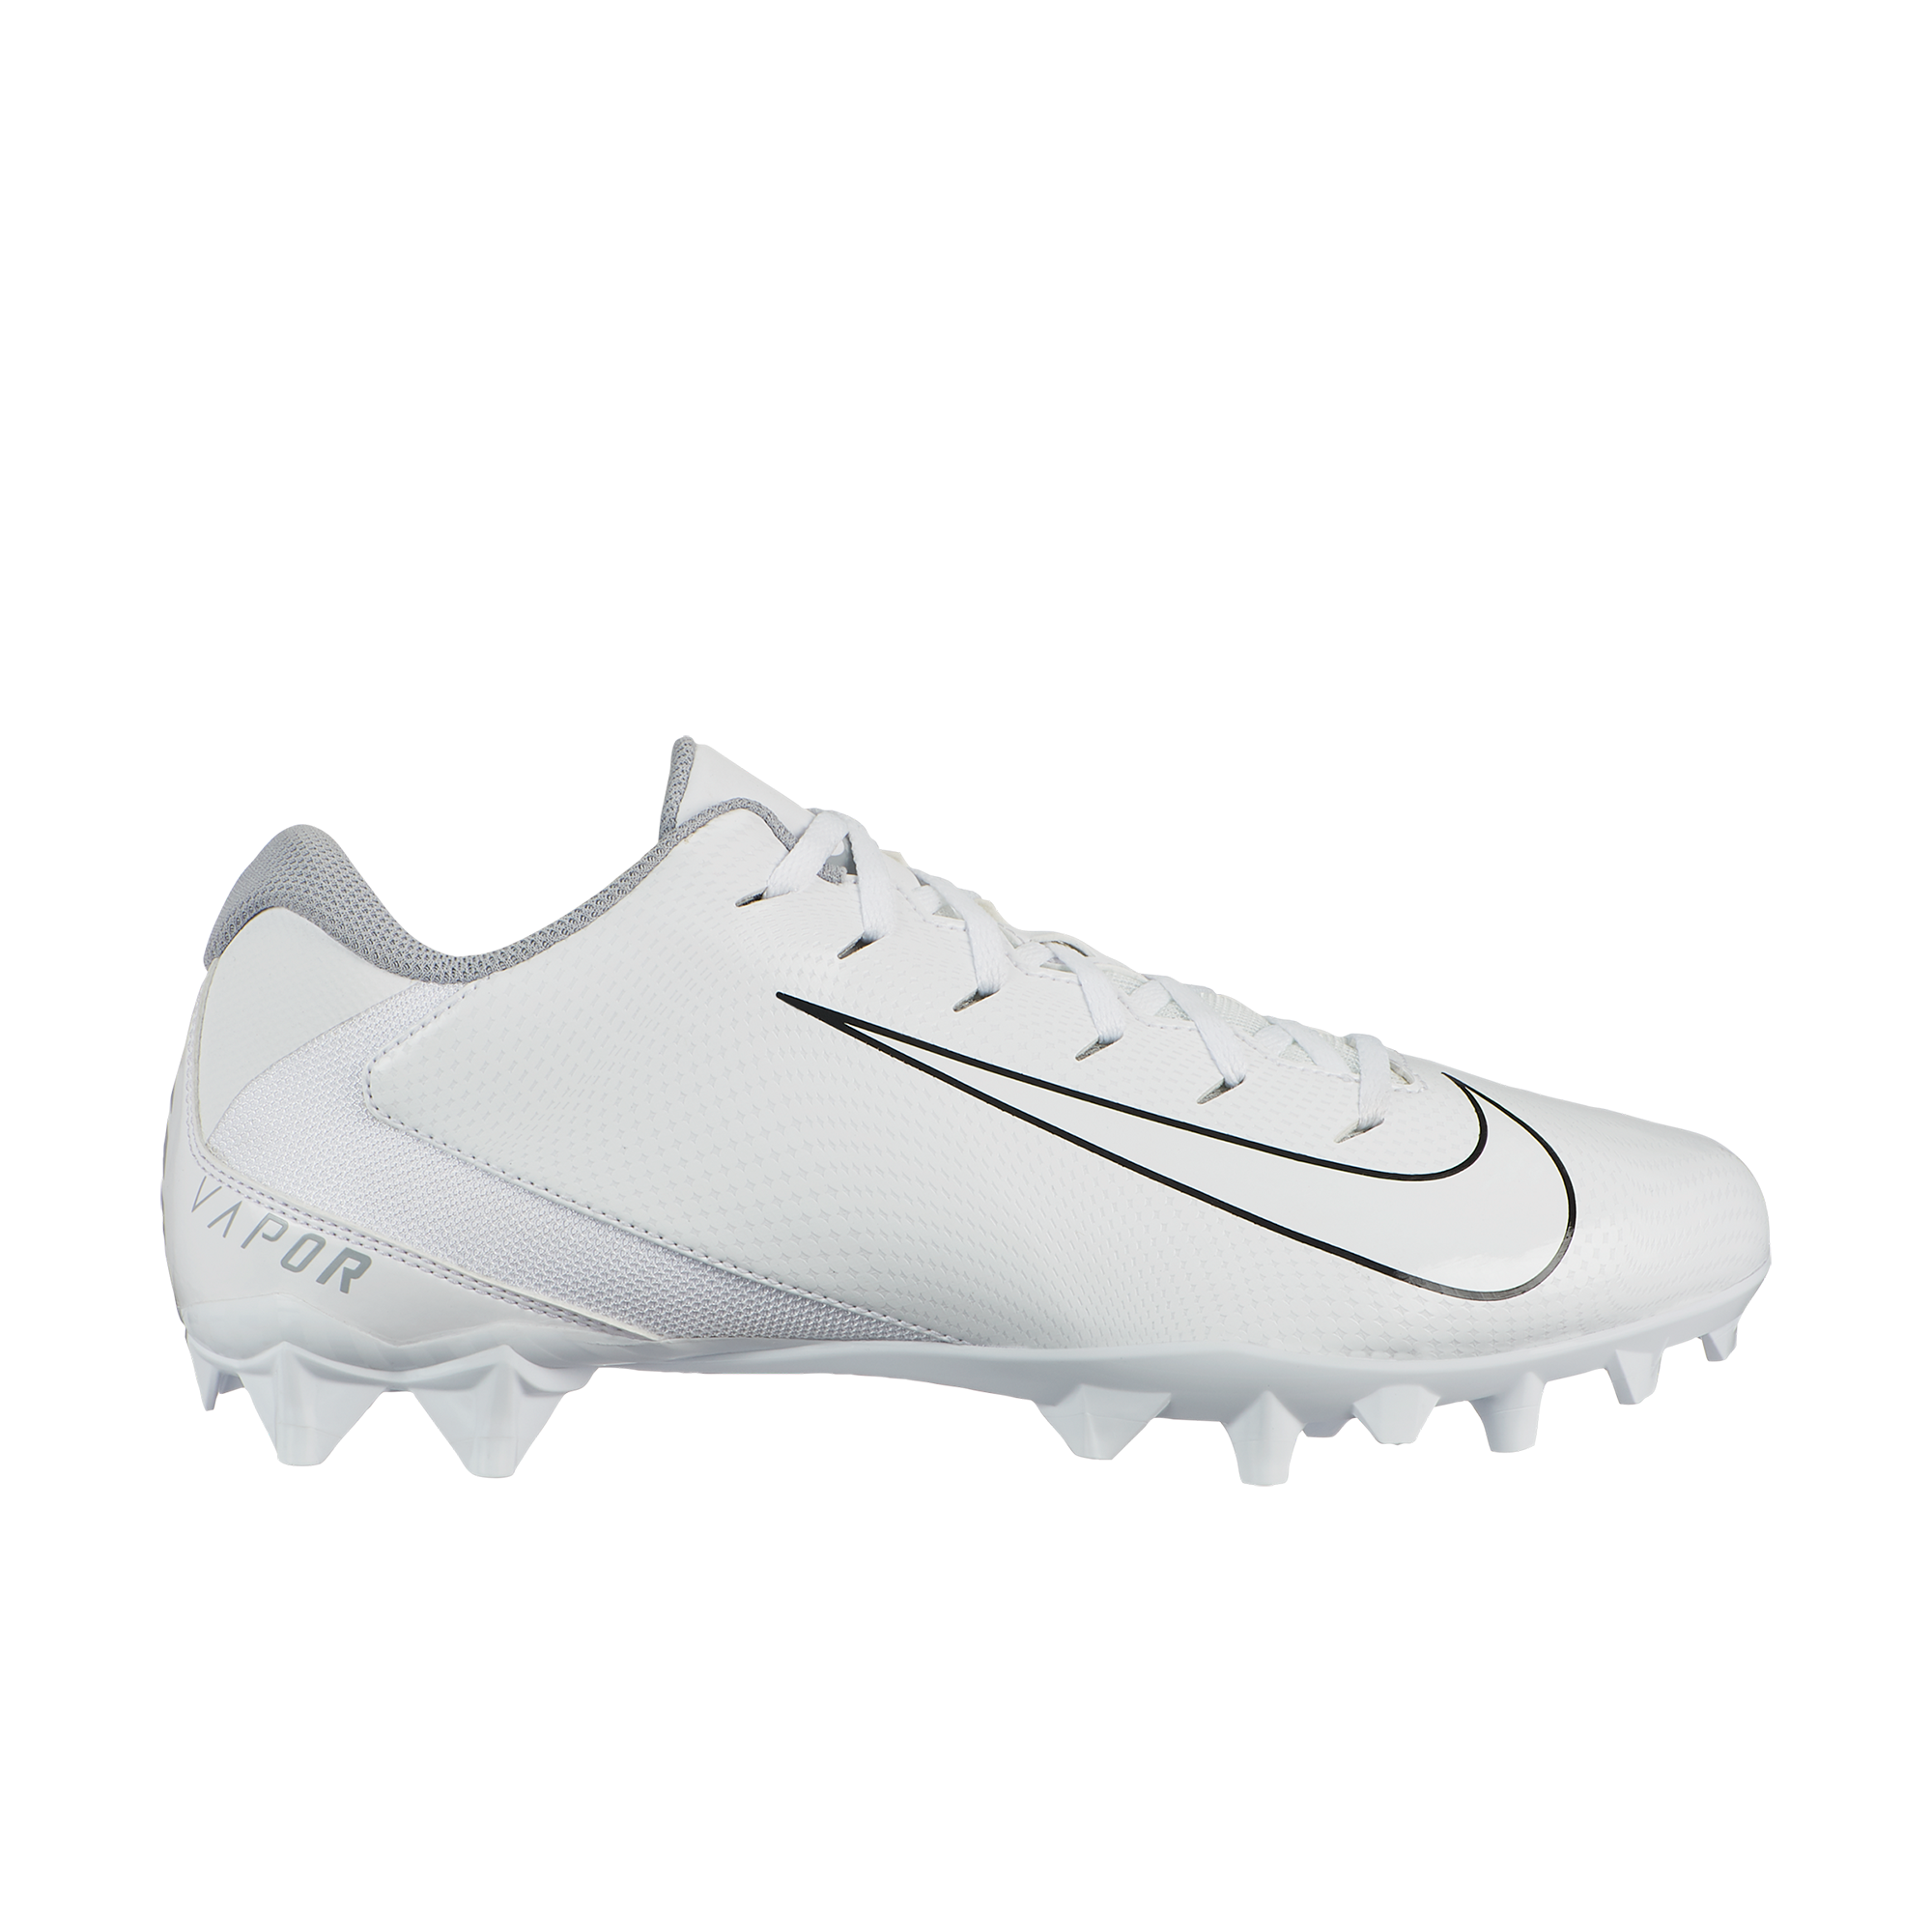 white on white football cleats